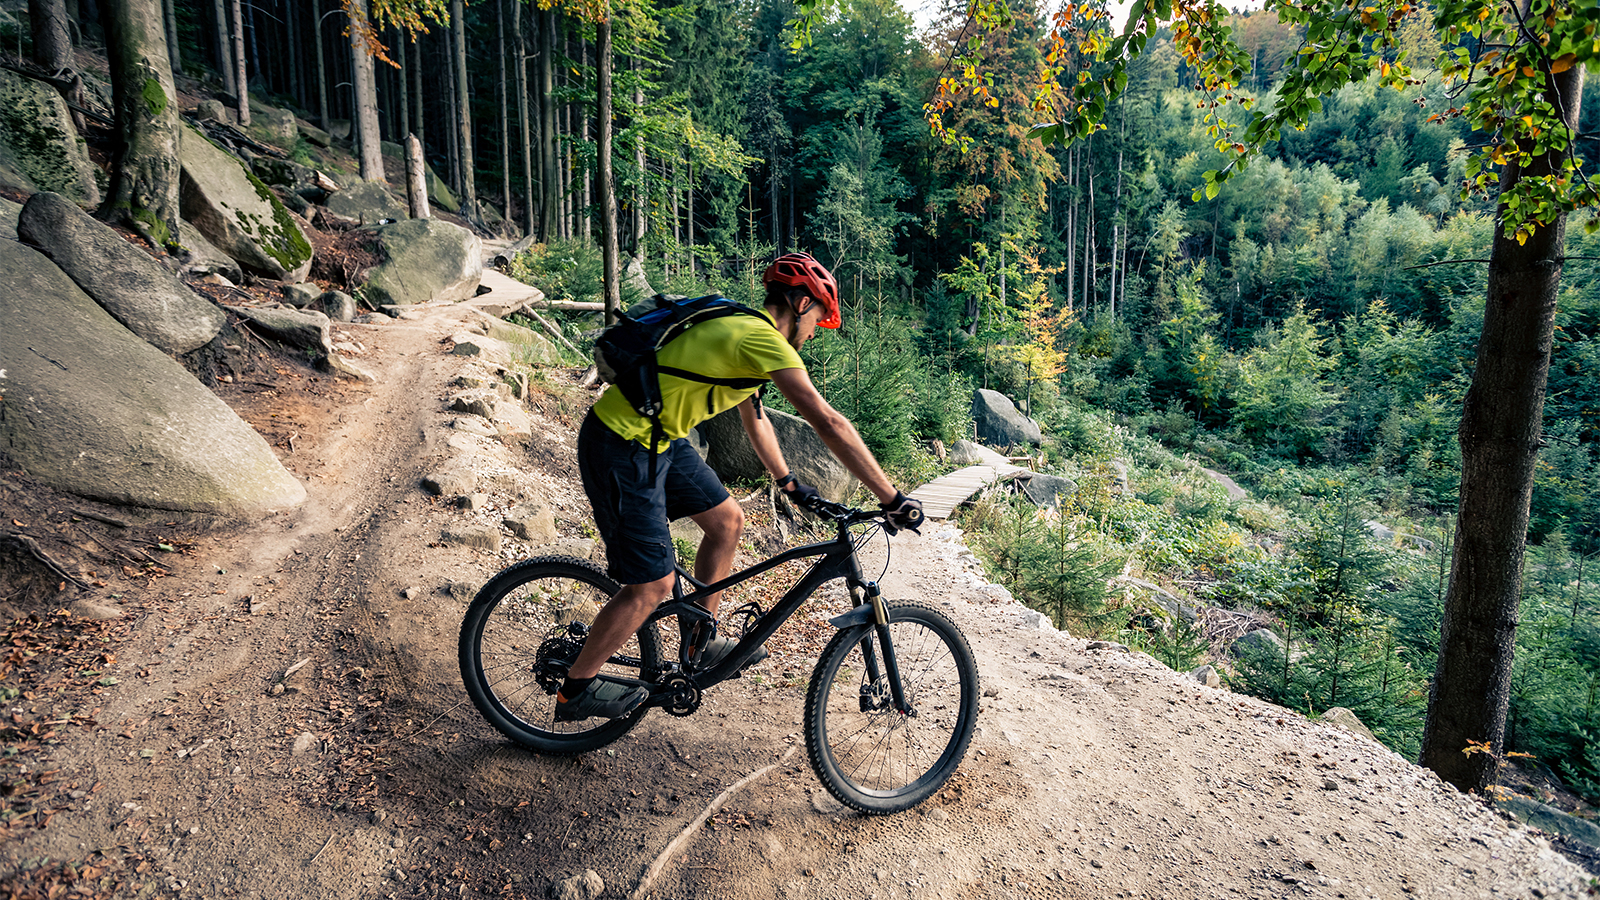 Mountain biker riding on bike in autumn inspirational mountains landscape. Man cycling MTB on enduro trail track. Sport fitness motivation and inspiration.